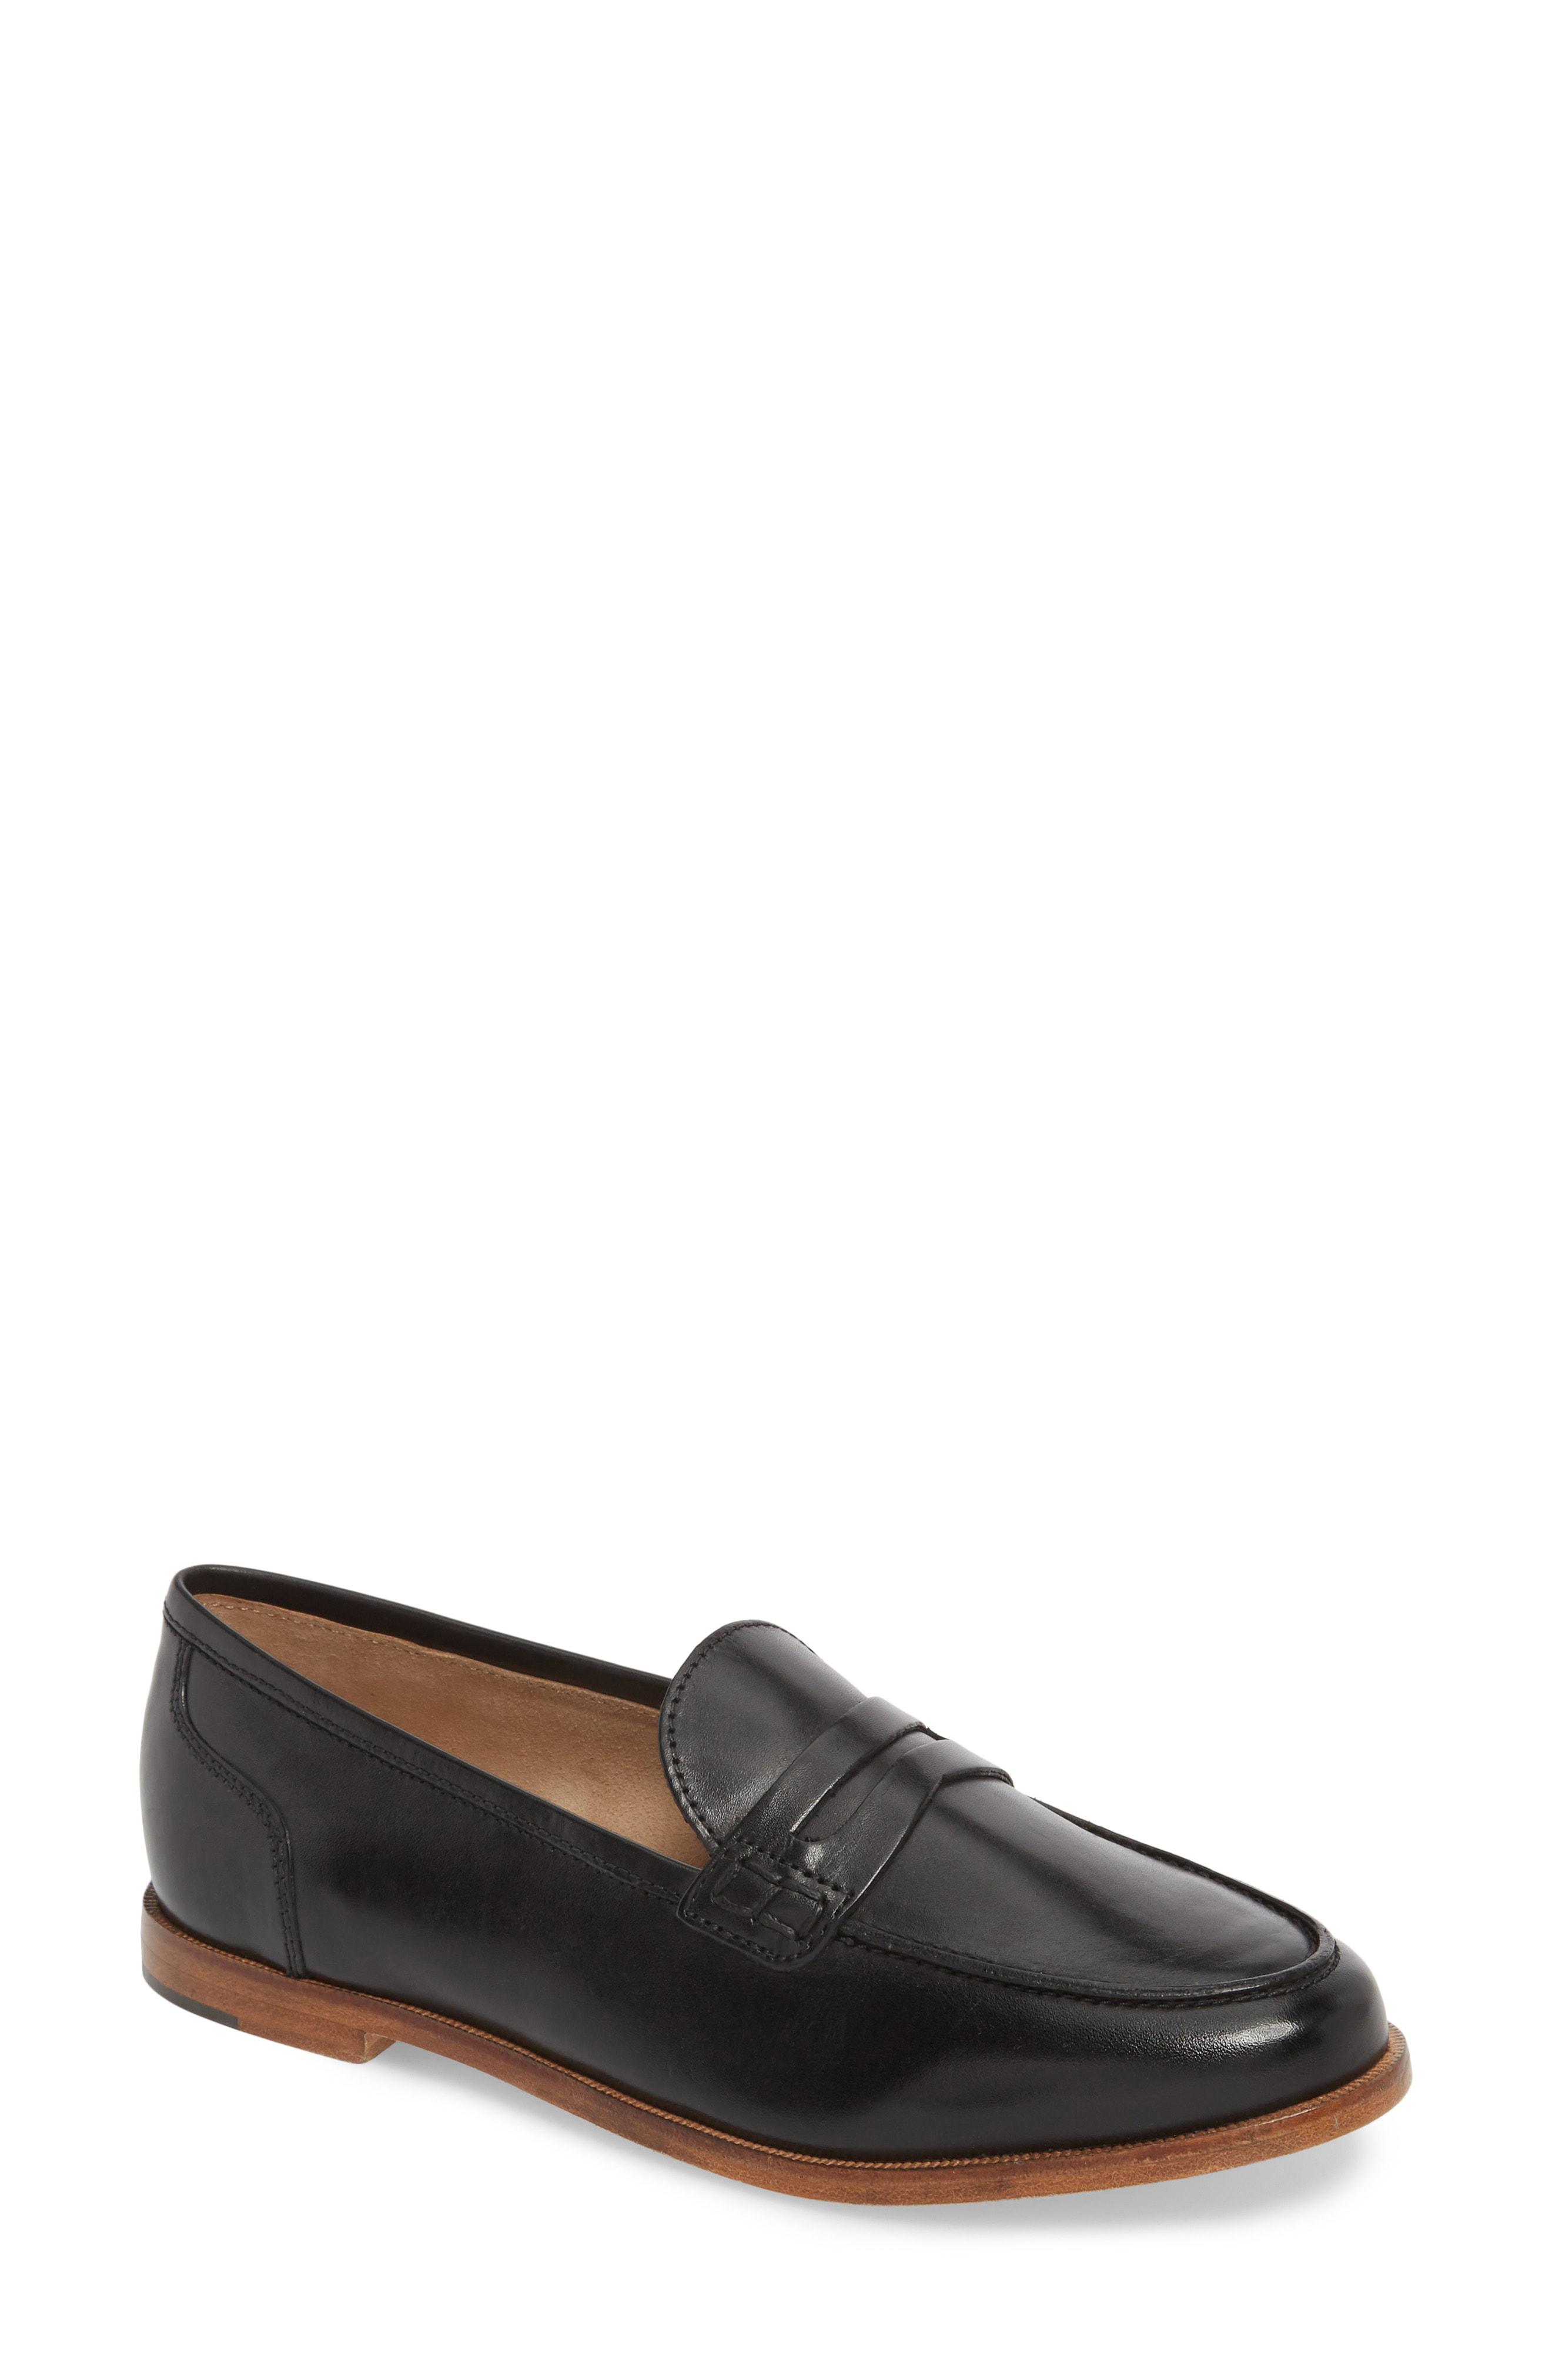 Lyst - J.Crew Ryan Penny Loafer in Black - Save 40.50632911392405%